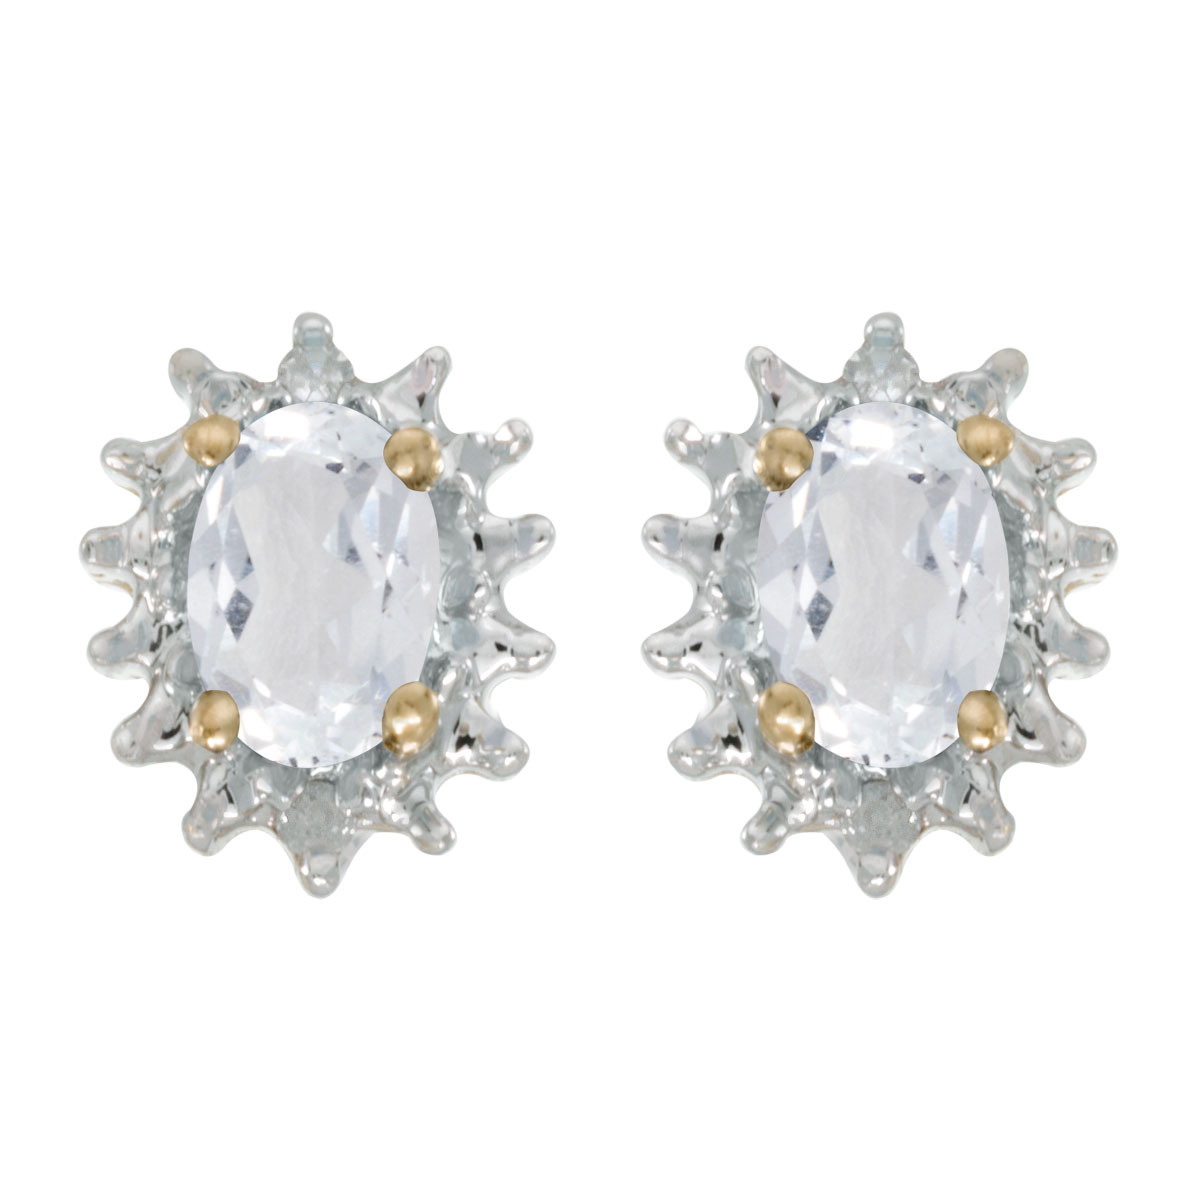 JCX1992: These 14k yellow gold oval white topaz and diamond earrings feature 6x4 mm genuine natural white topazs with a 0.96 ct total weight and .04 ct diamonds.